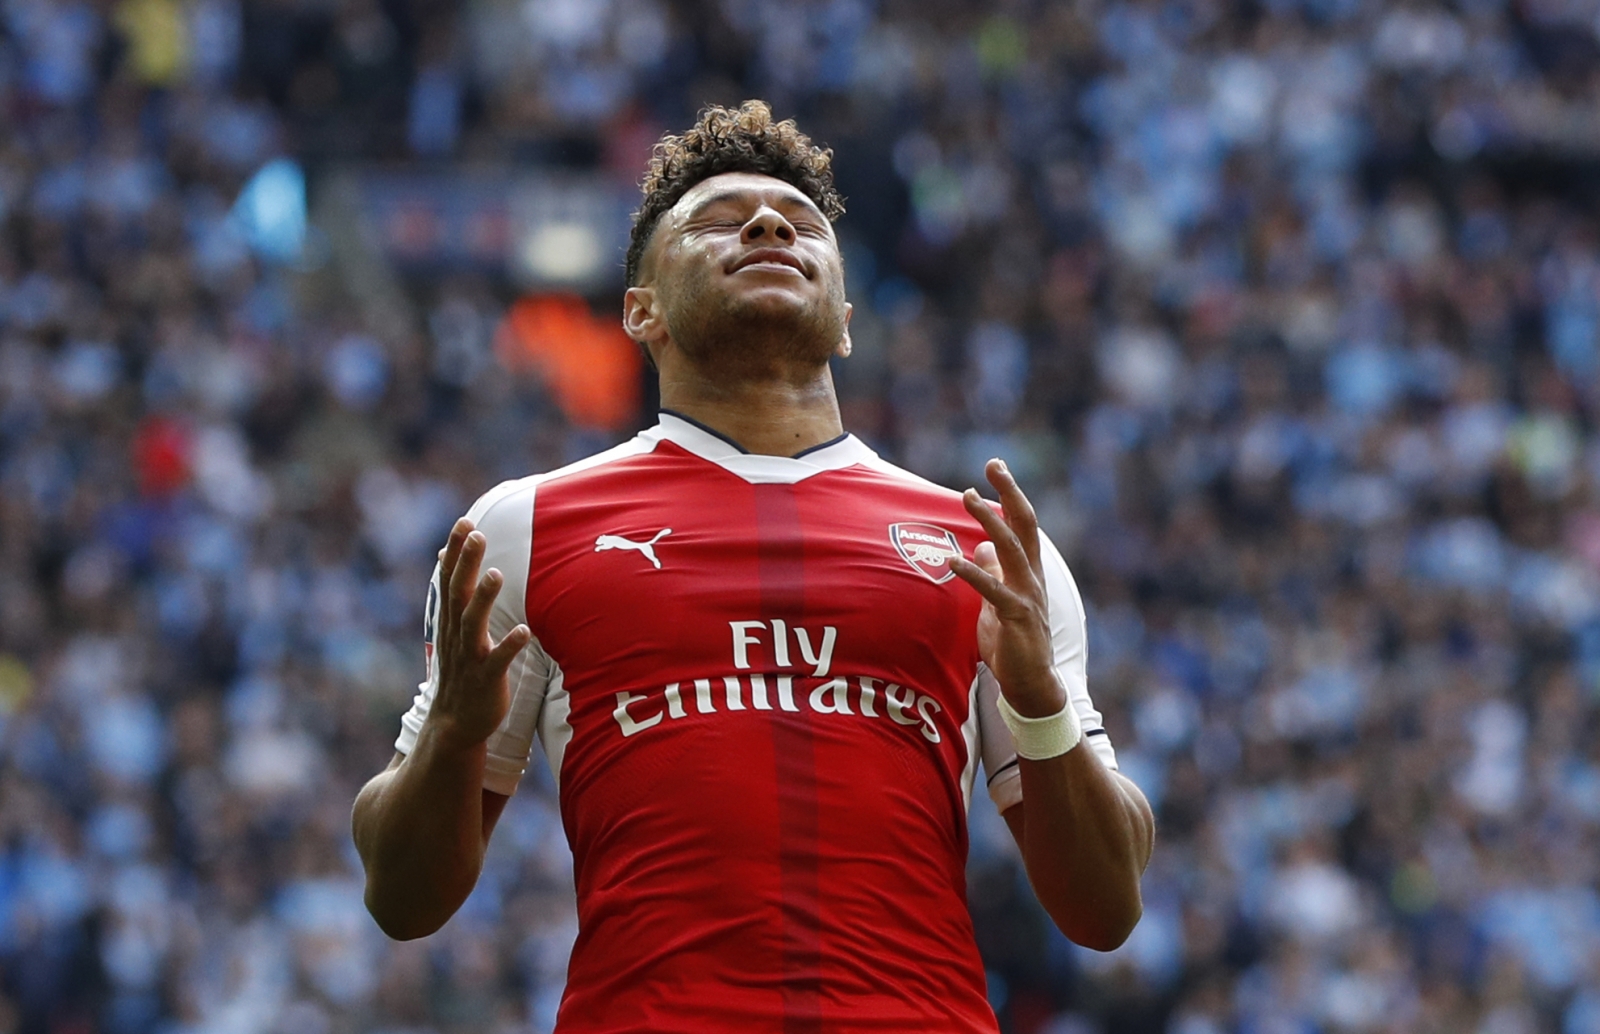 Arsenal will 'definitely' attempt to tie Alex Oxlade-Chamberlain down to new contract, says Parlour